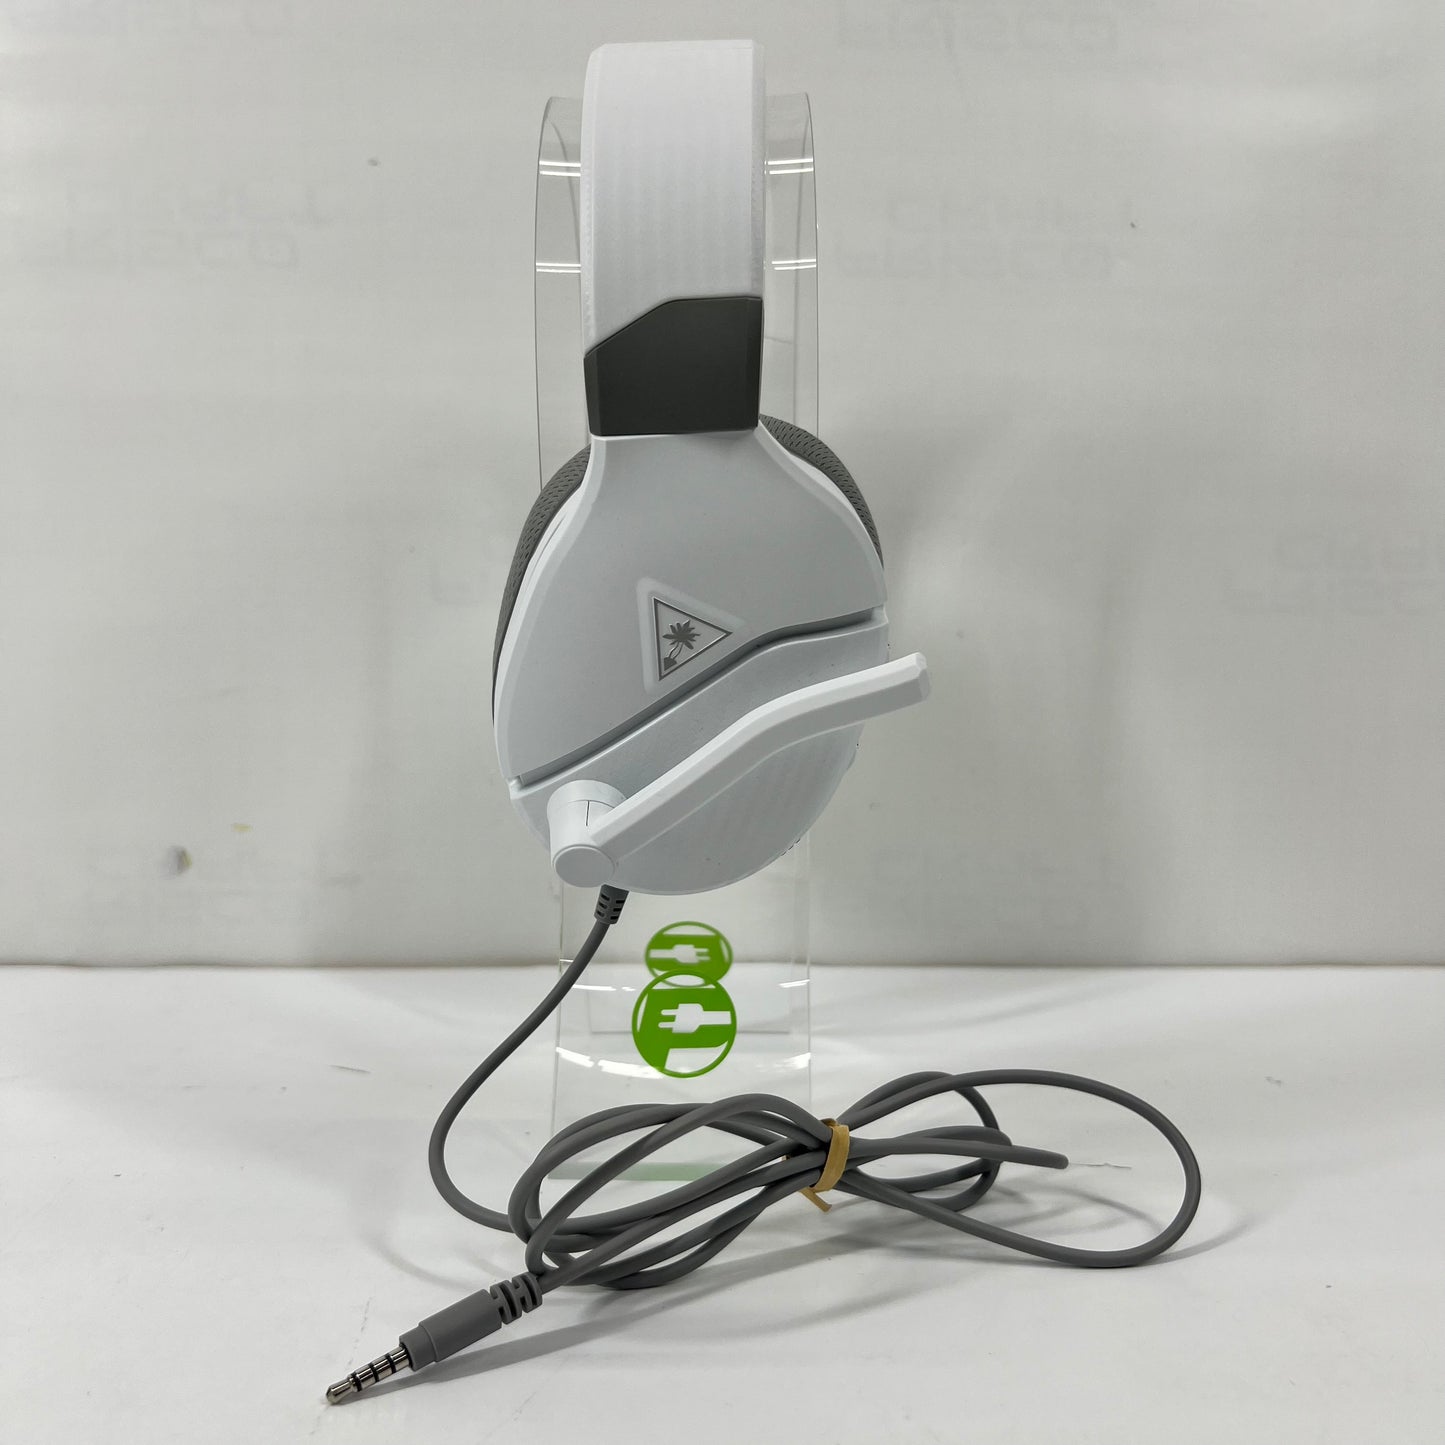 Turtle Beach Recon 200 Wired Over-Ear Gaming Headset White